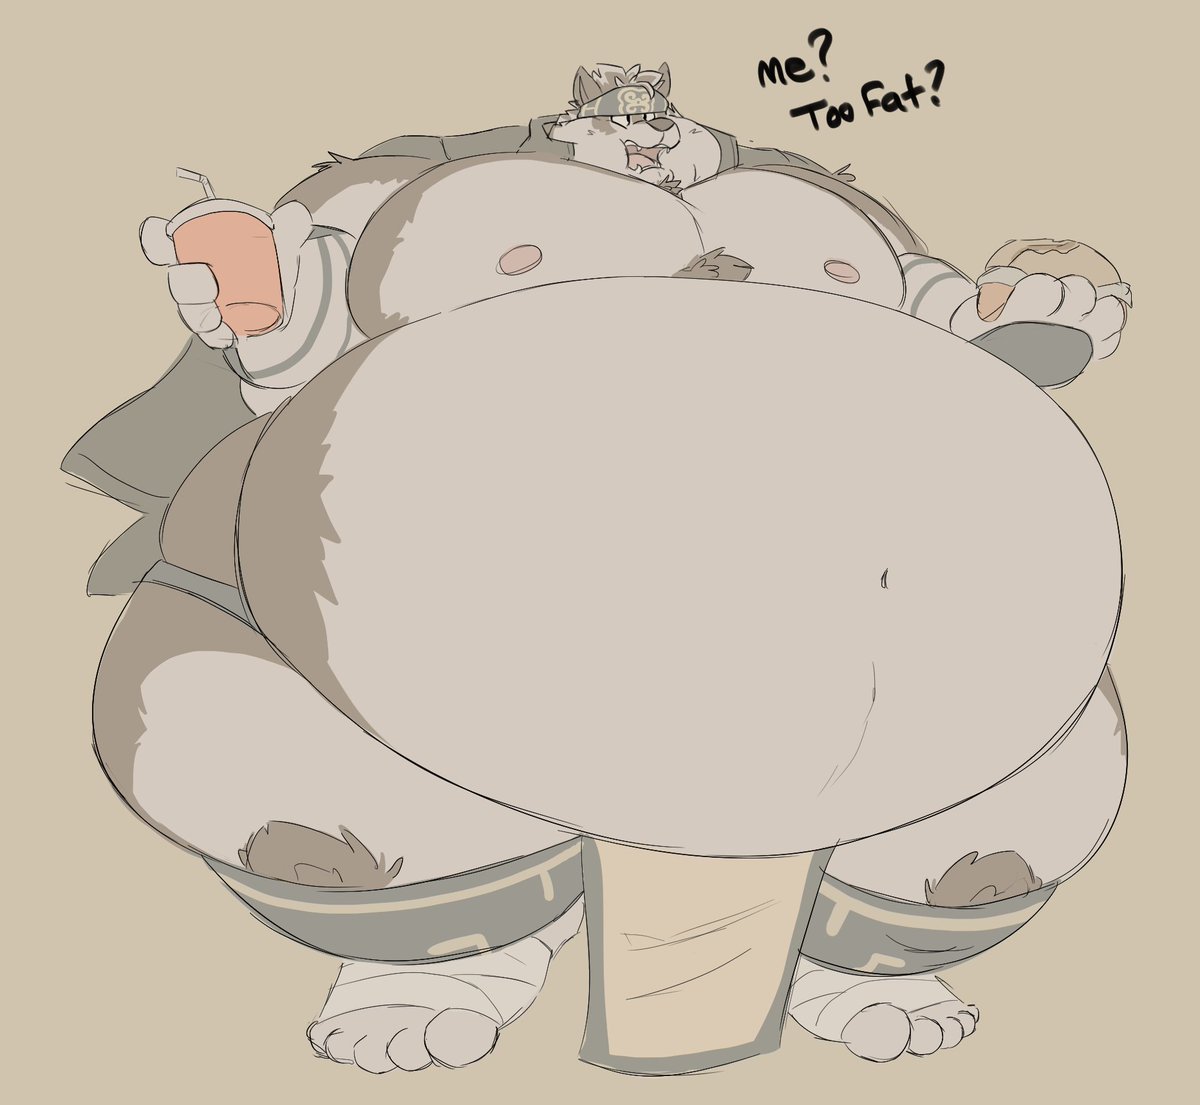 No such thing as too fat >w>